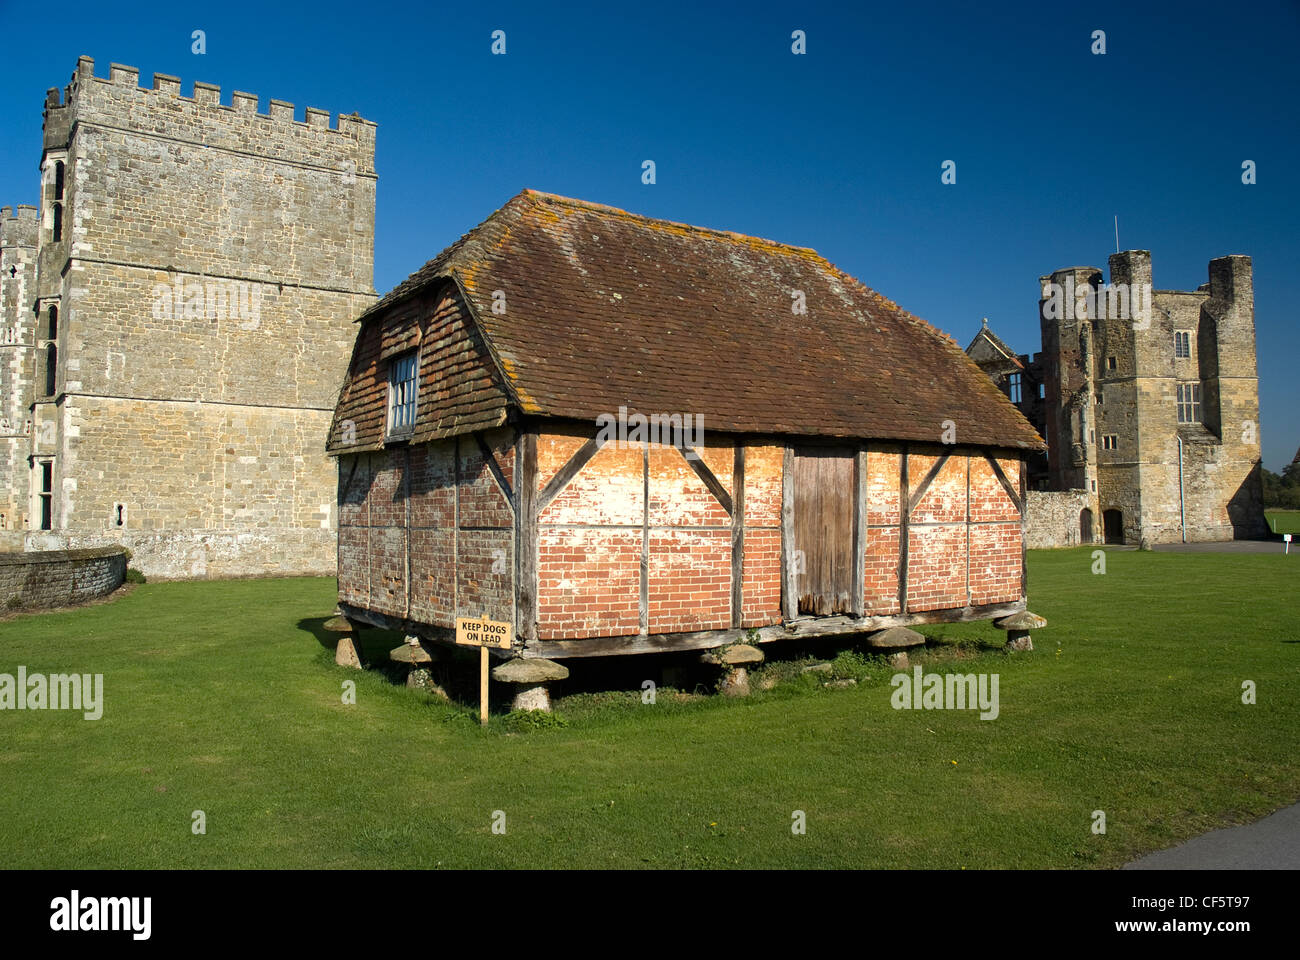 A Tudor barn in the grounds of Cowdray ruins, one of Southern England's most important early Tudor courtier's palaces. Stock Photo